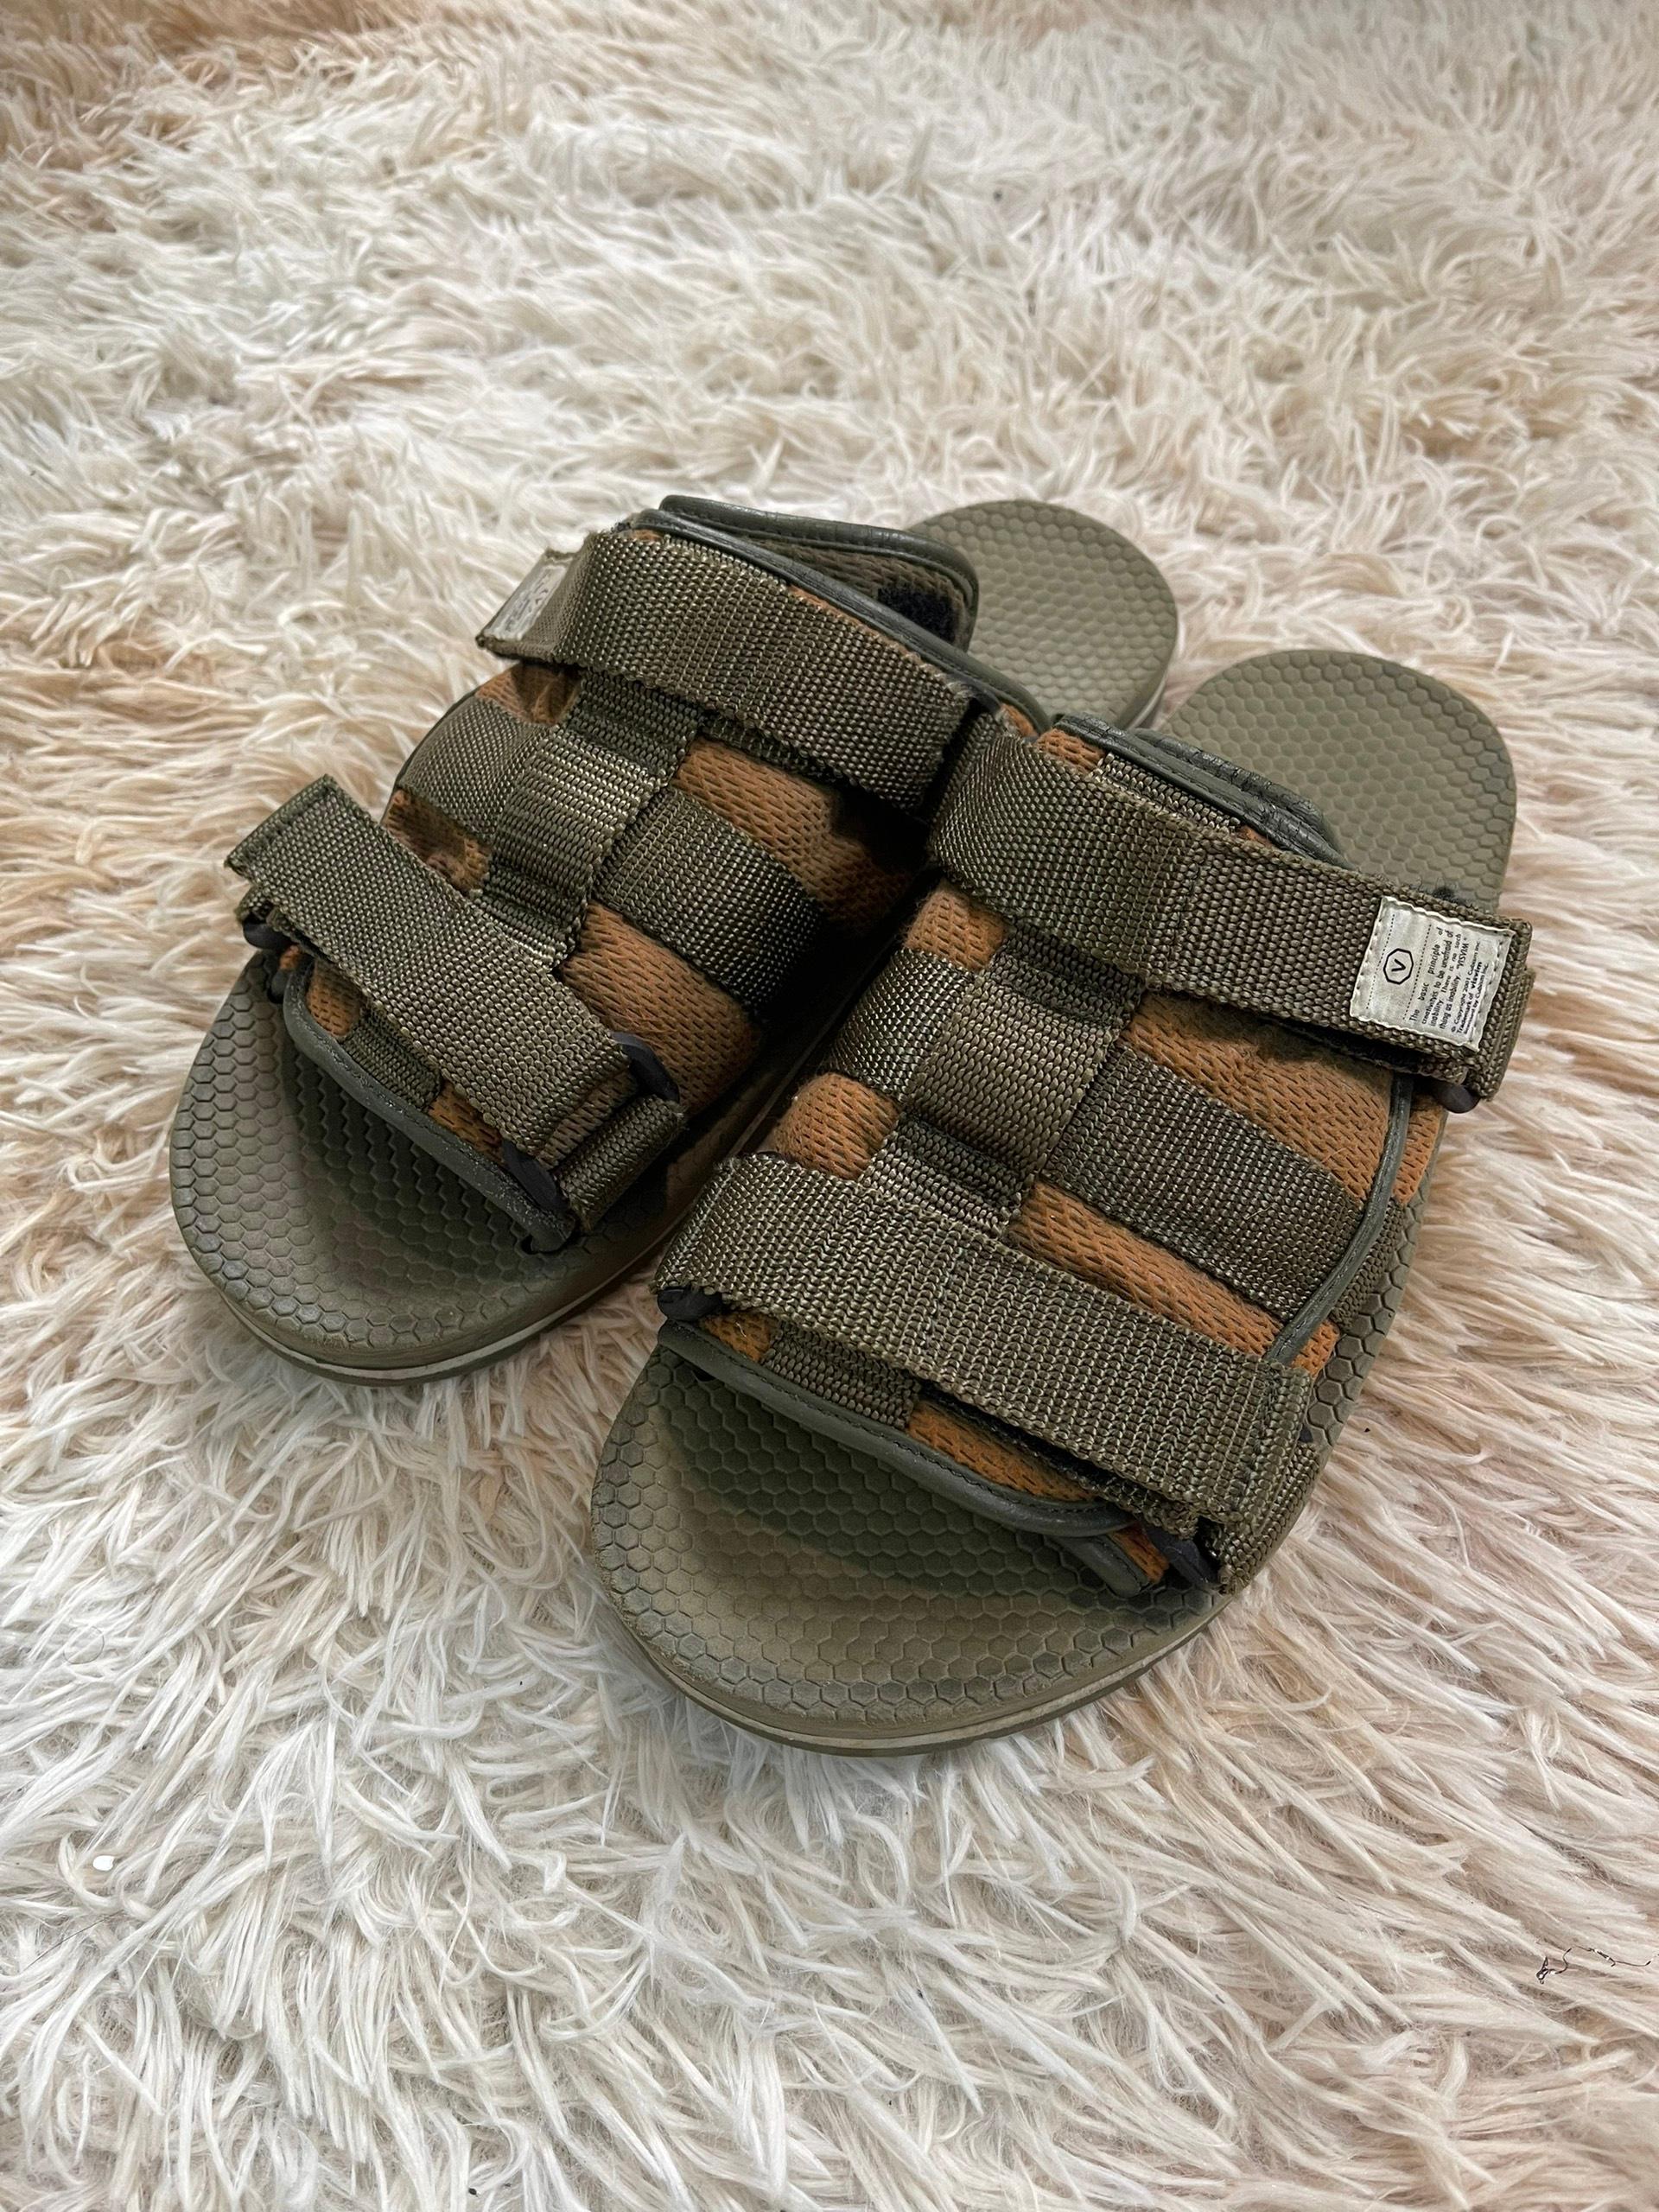 Size: 10, fits a size 43-44.

Condition: 9/10. No signs of usage, please see pictures for references.

Feels free to message me with any questions regarding inquiries